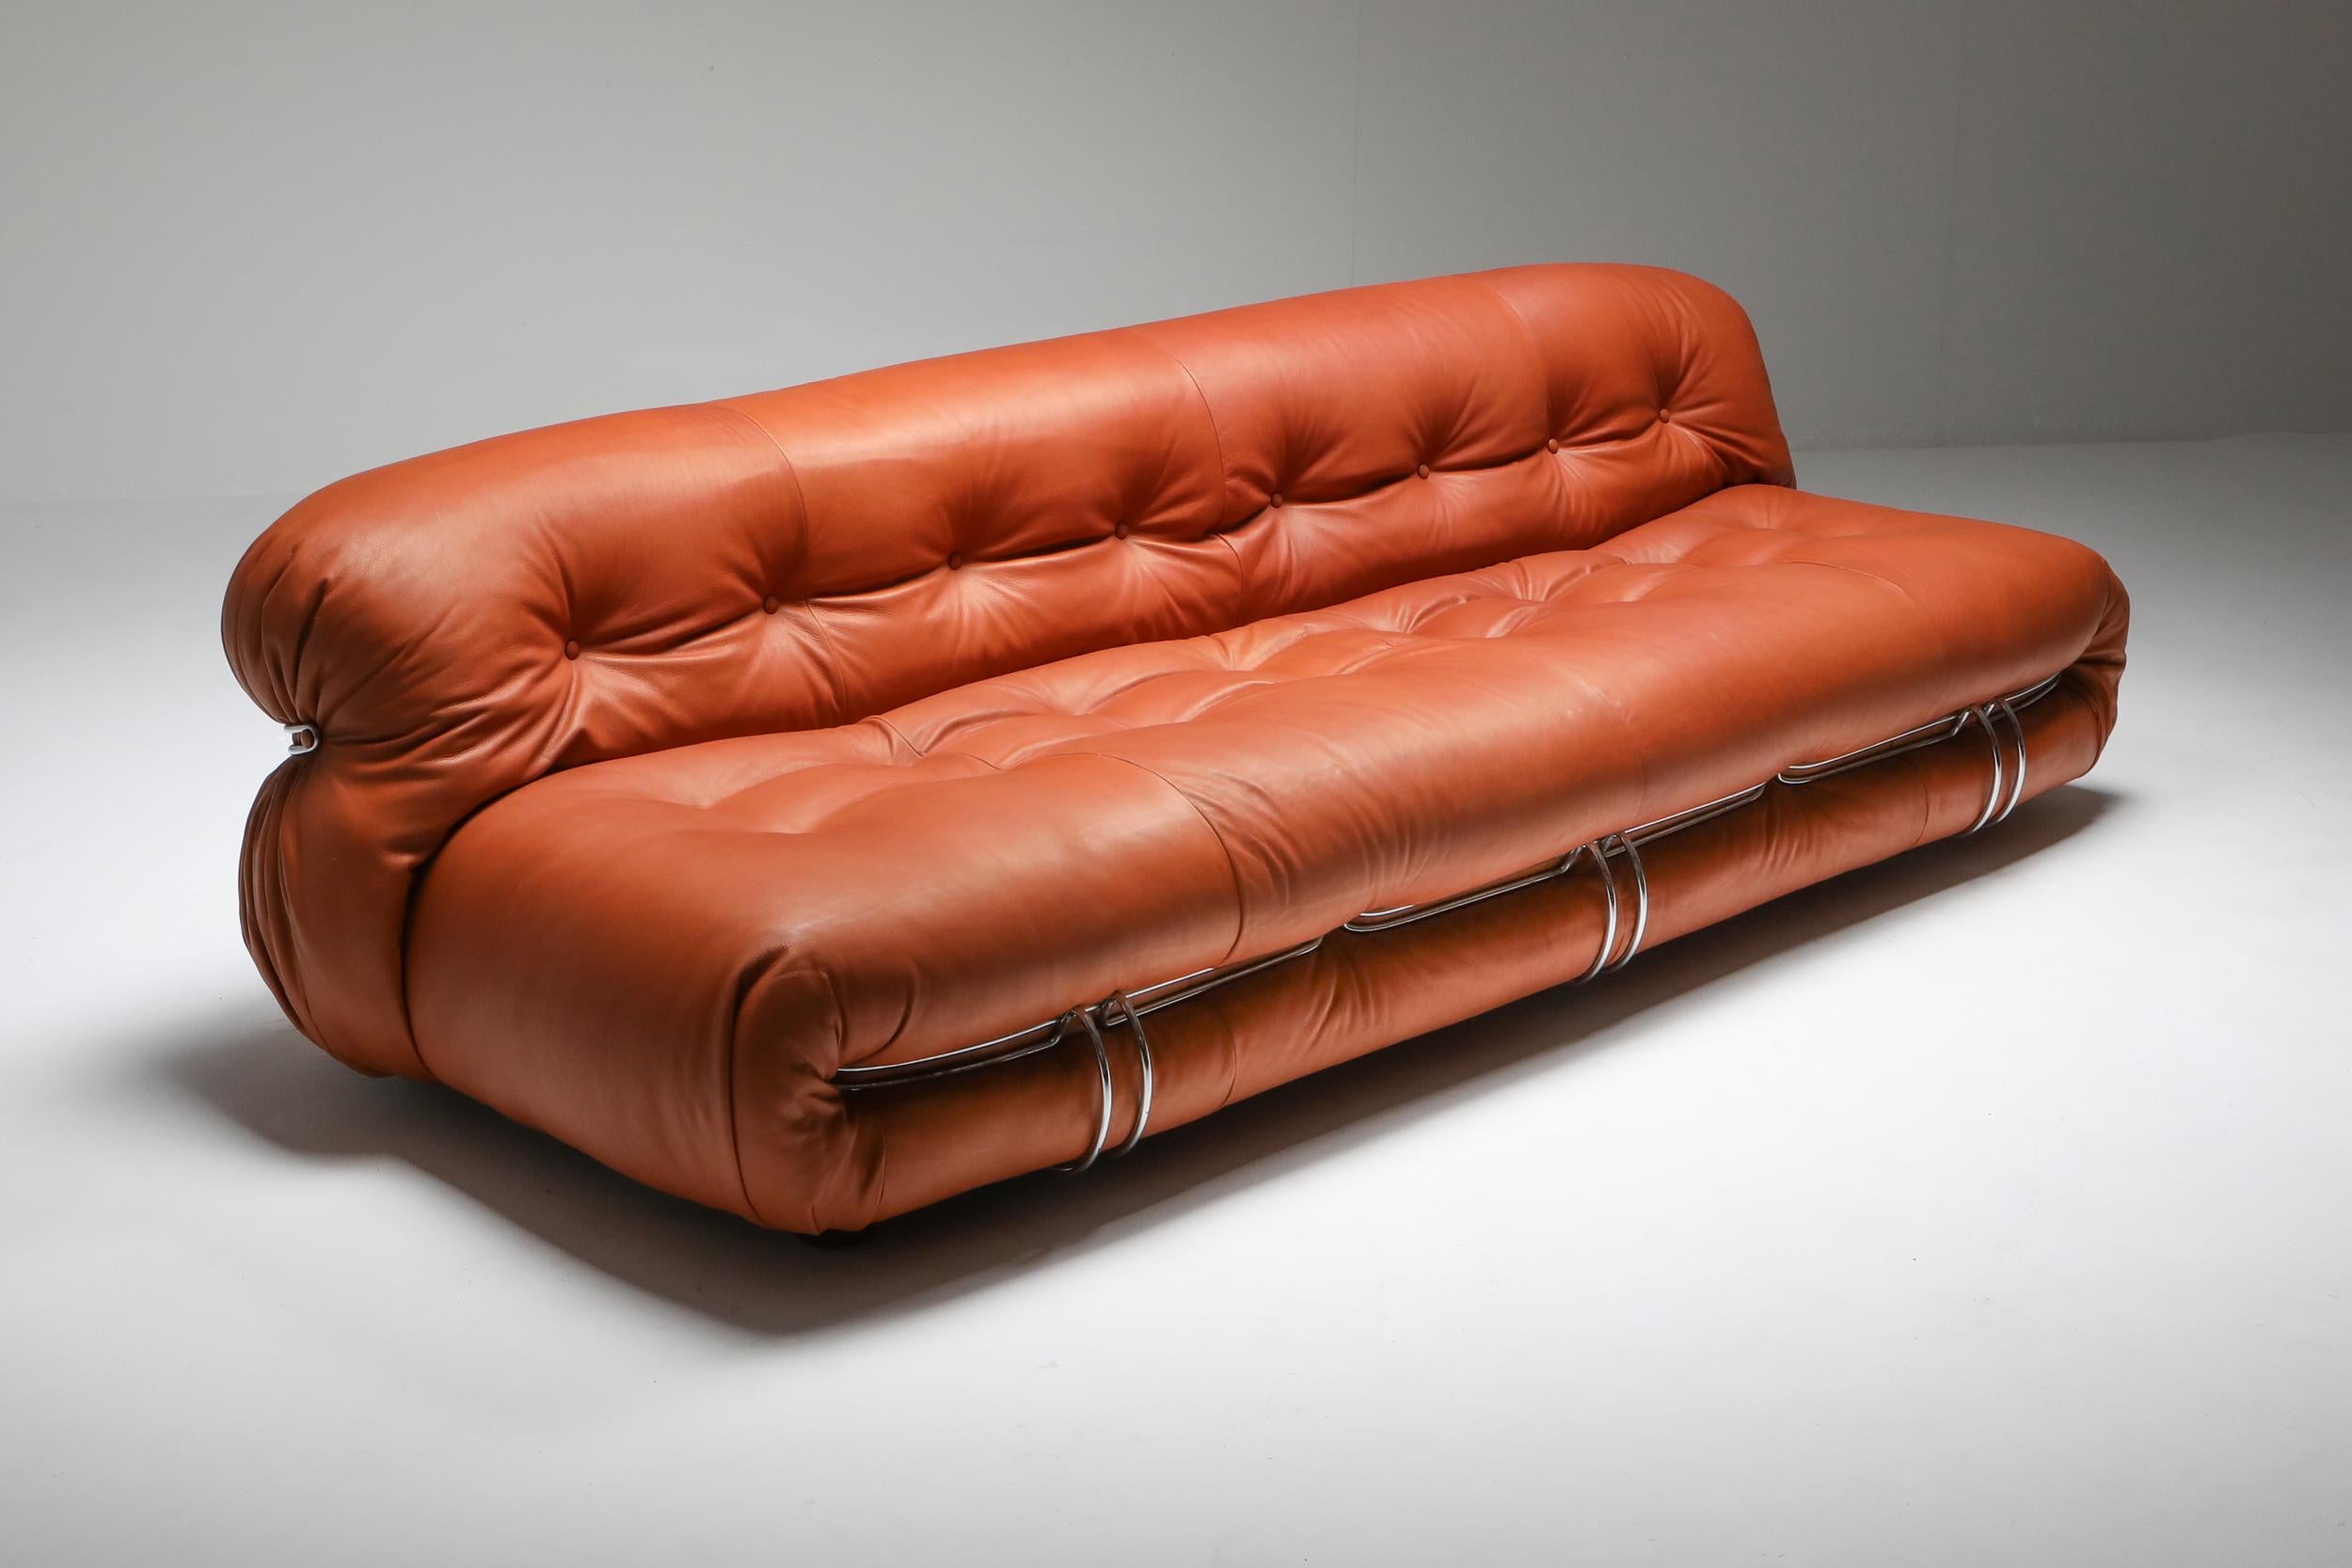 Scarpa; Cassina; Tobia Scarpa; Afra Scarpa; Minimalist; Italian Design; Hollywood Regency; Post-modern;

Afra and Tobia Scarpa for Cassina, Soriana, reupholstered in aniline leather. Manufactured by Cassina in the 1970s, the Soriana collection was